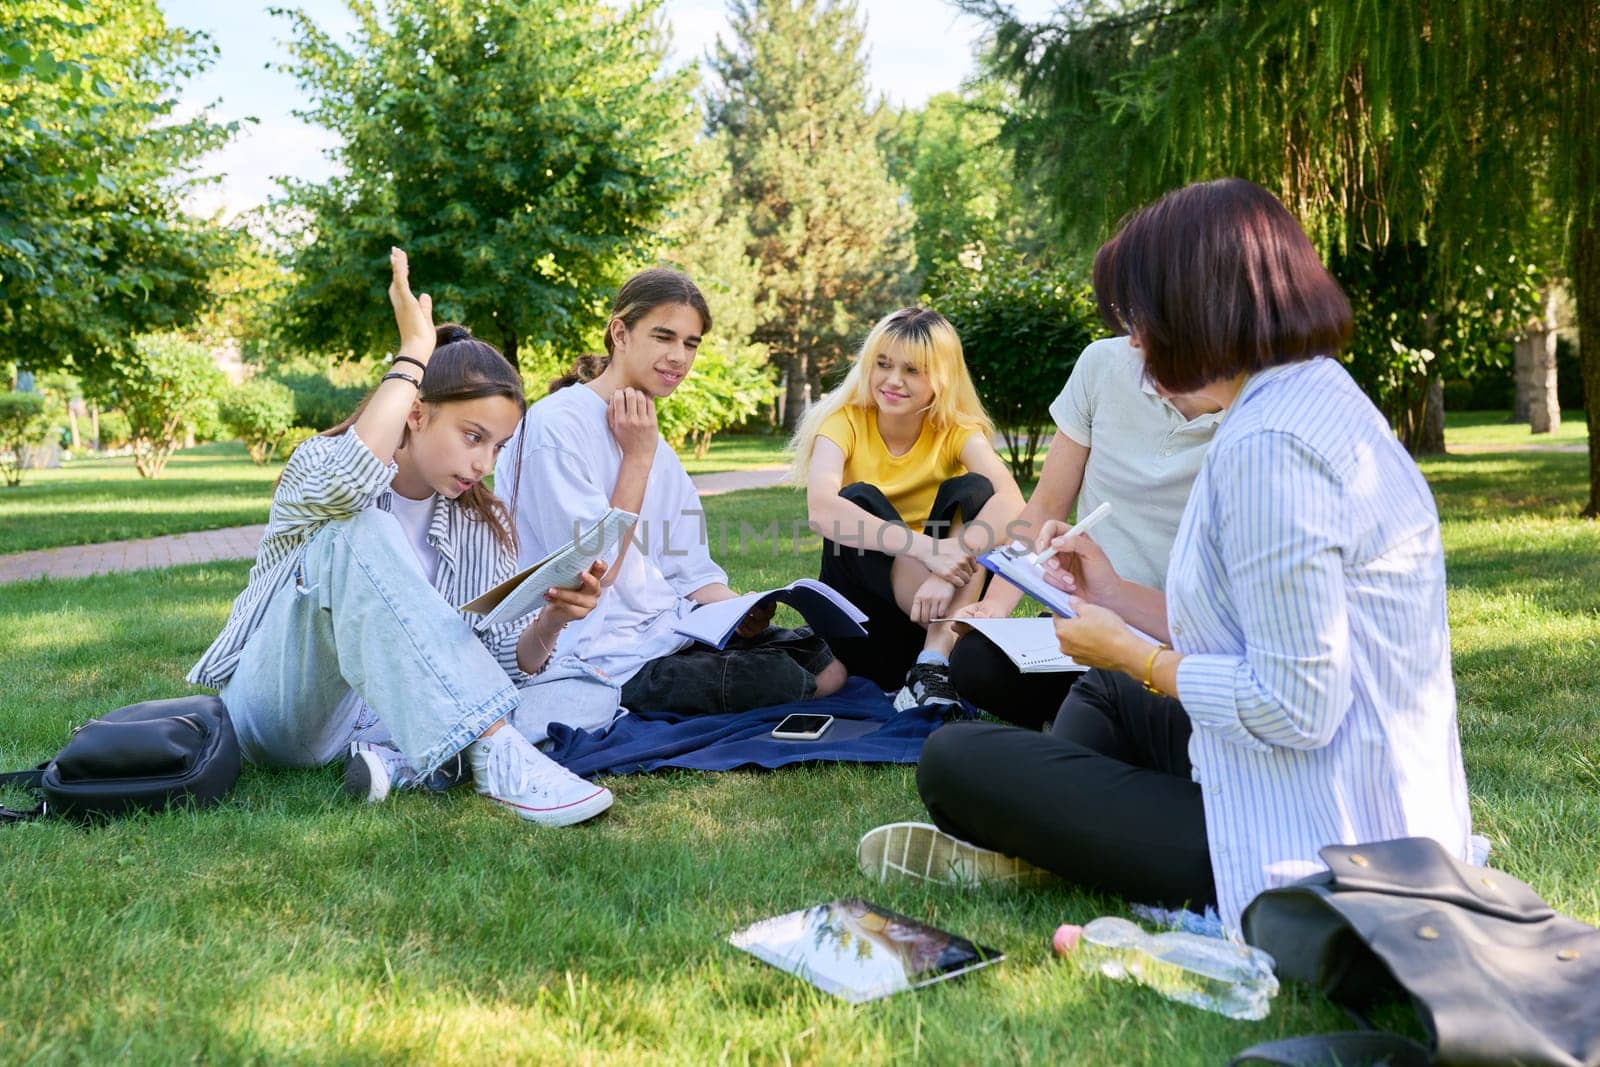 Outdoor, group of students with female teacher sitting on grass by VH-studio